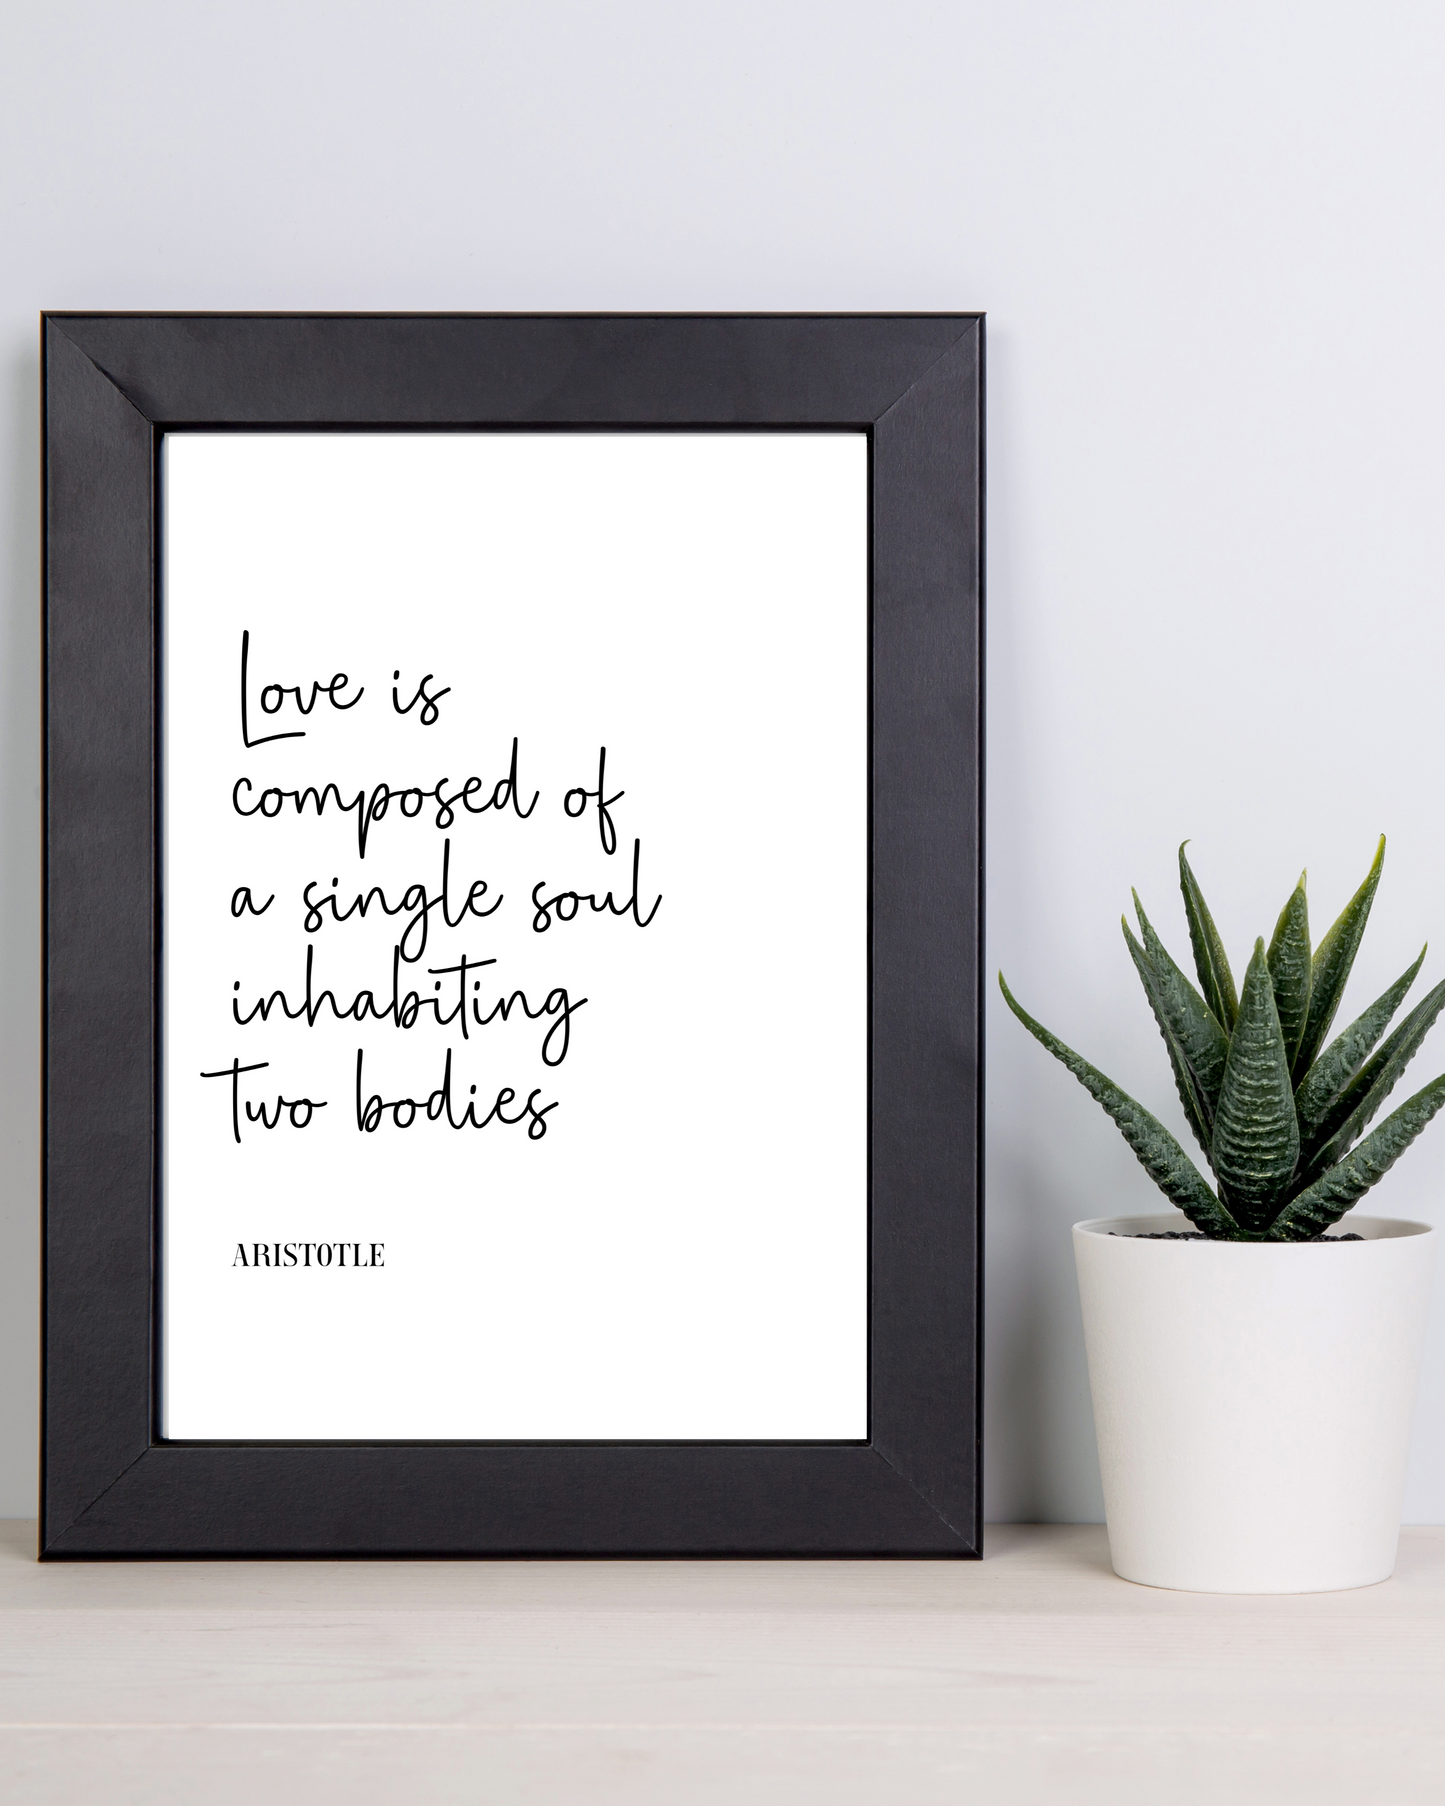 "Love Is Composed Of A Single Soul Inhabiting Two Bodies" Famous Quote By Aristotle, Love Quotes, Printable Art